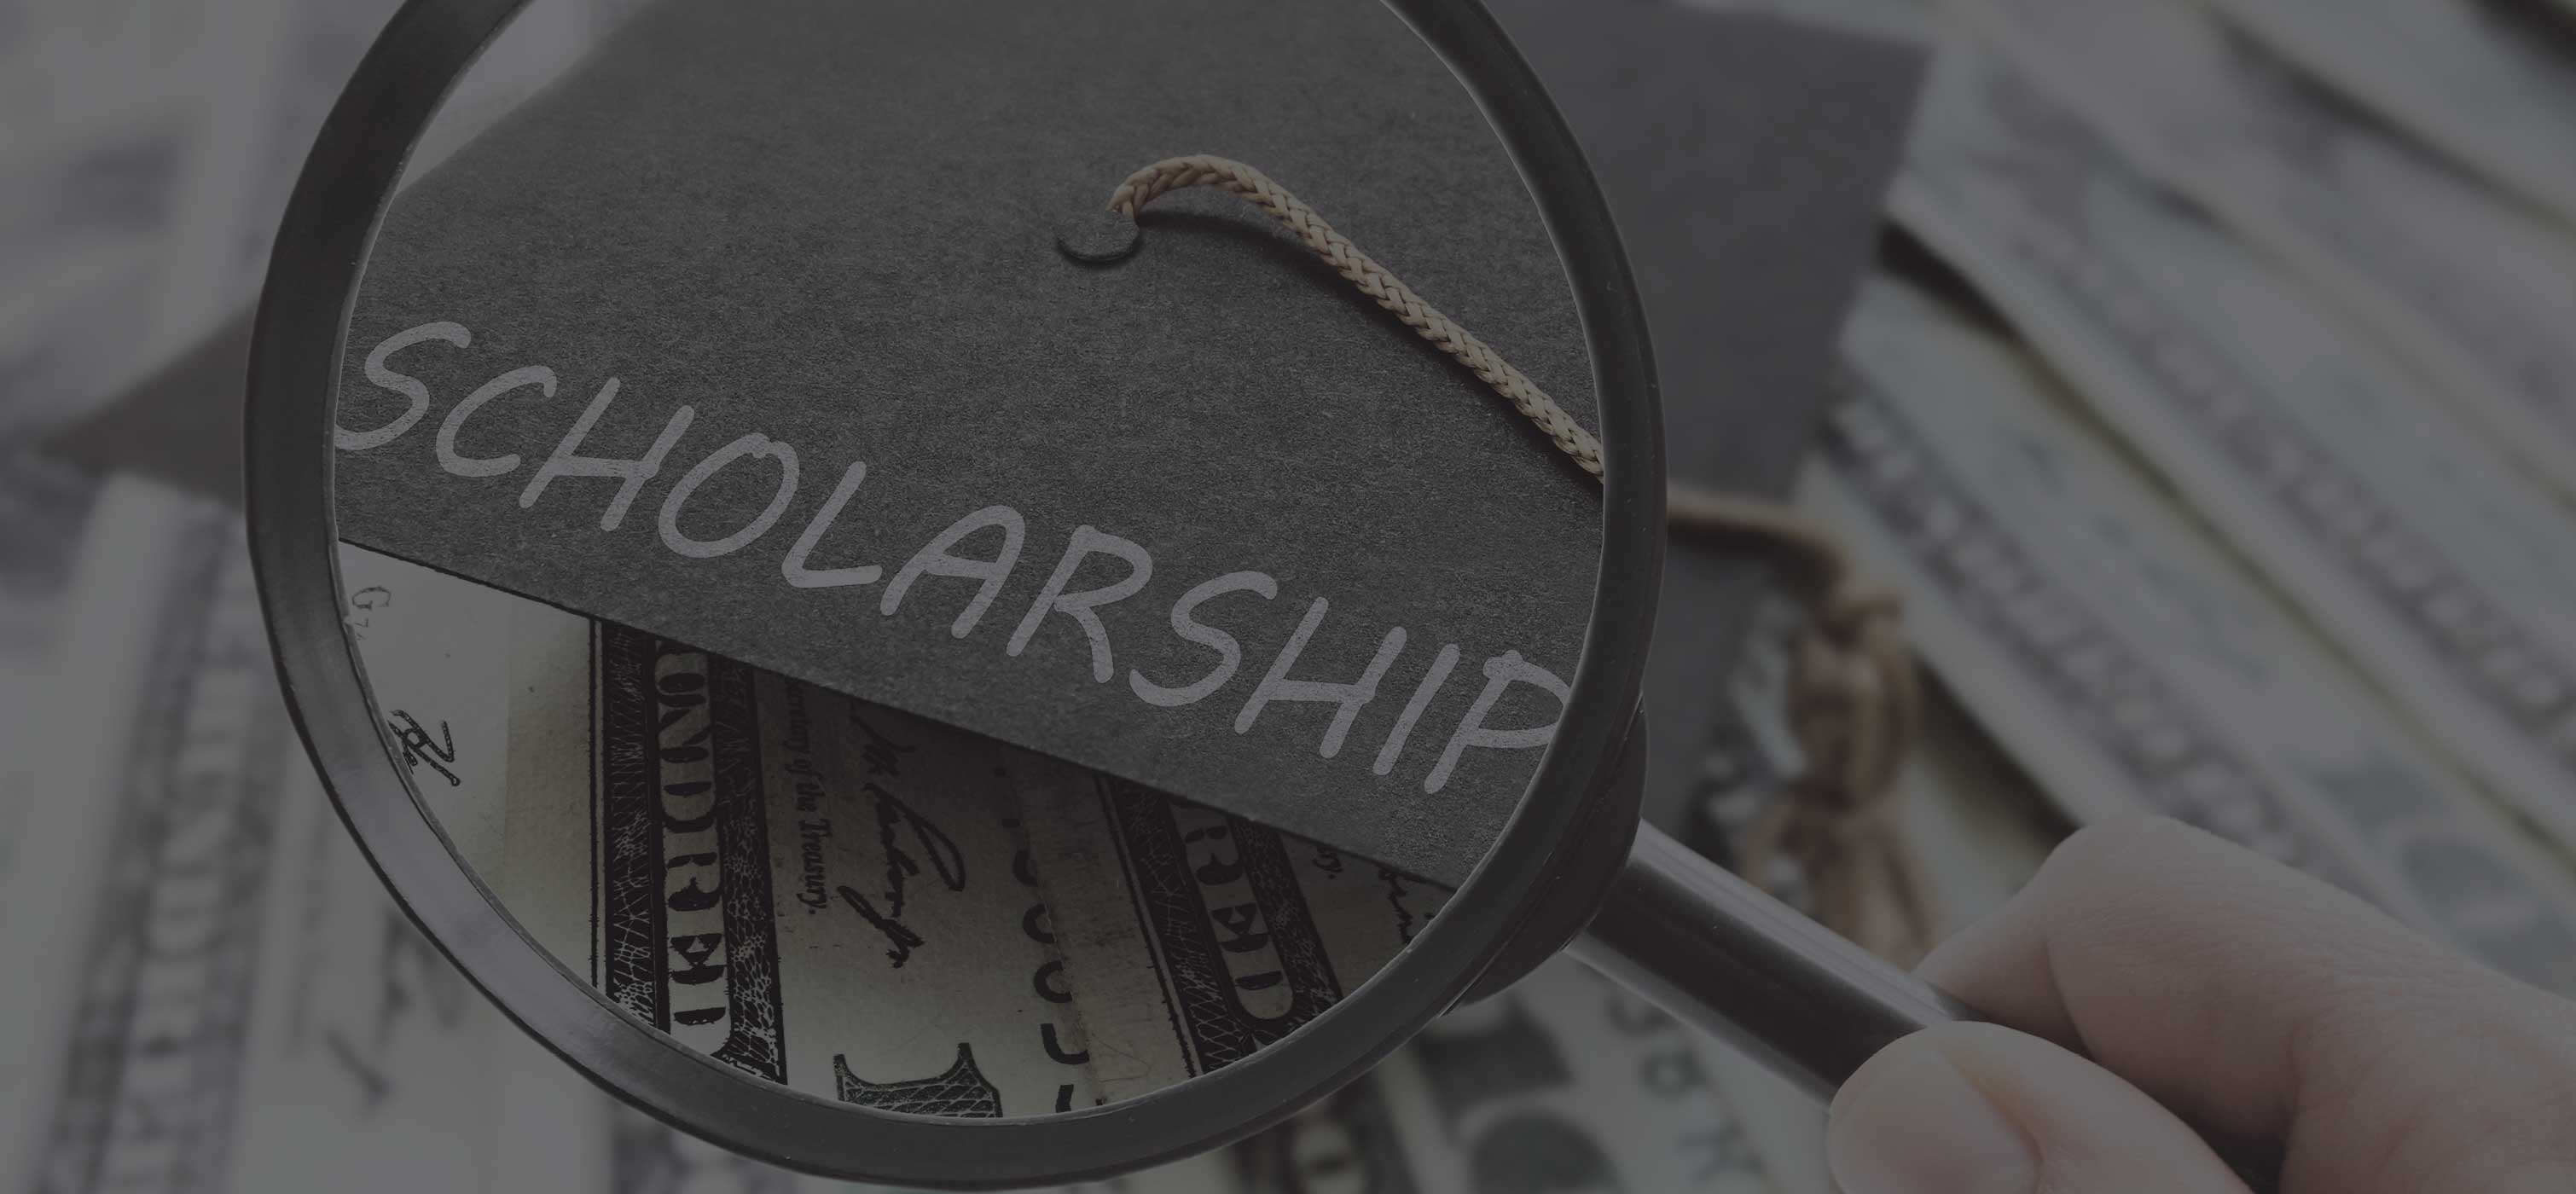 Magnifying glass held over a graduation cap that says Scholarship on it with a background of $100 bills